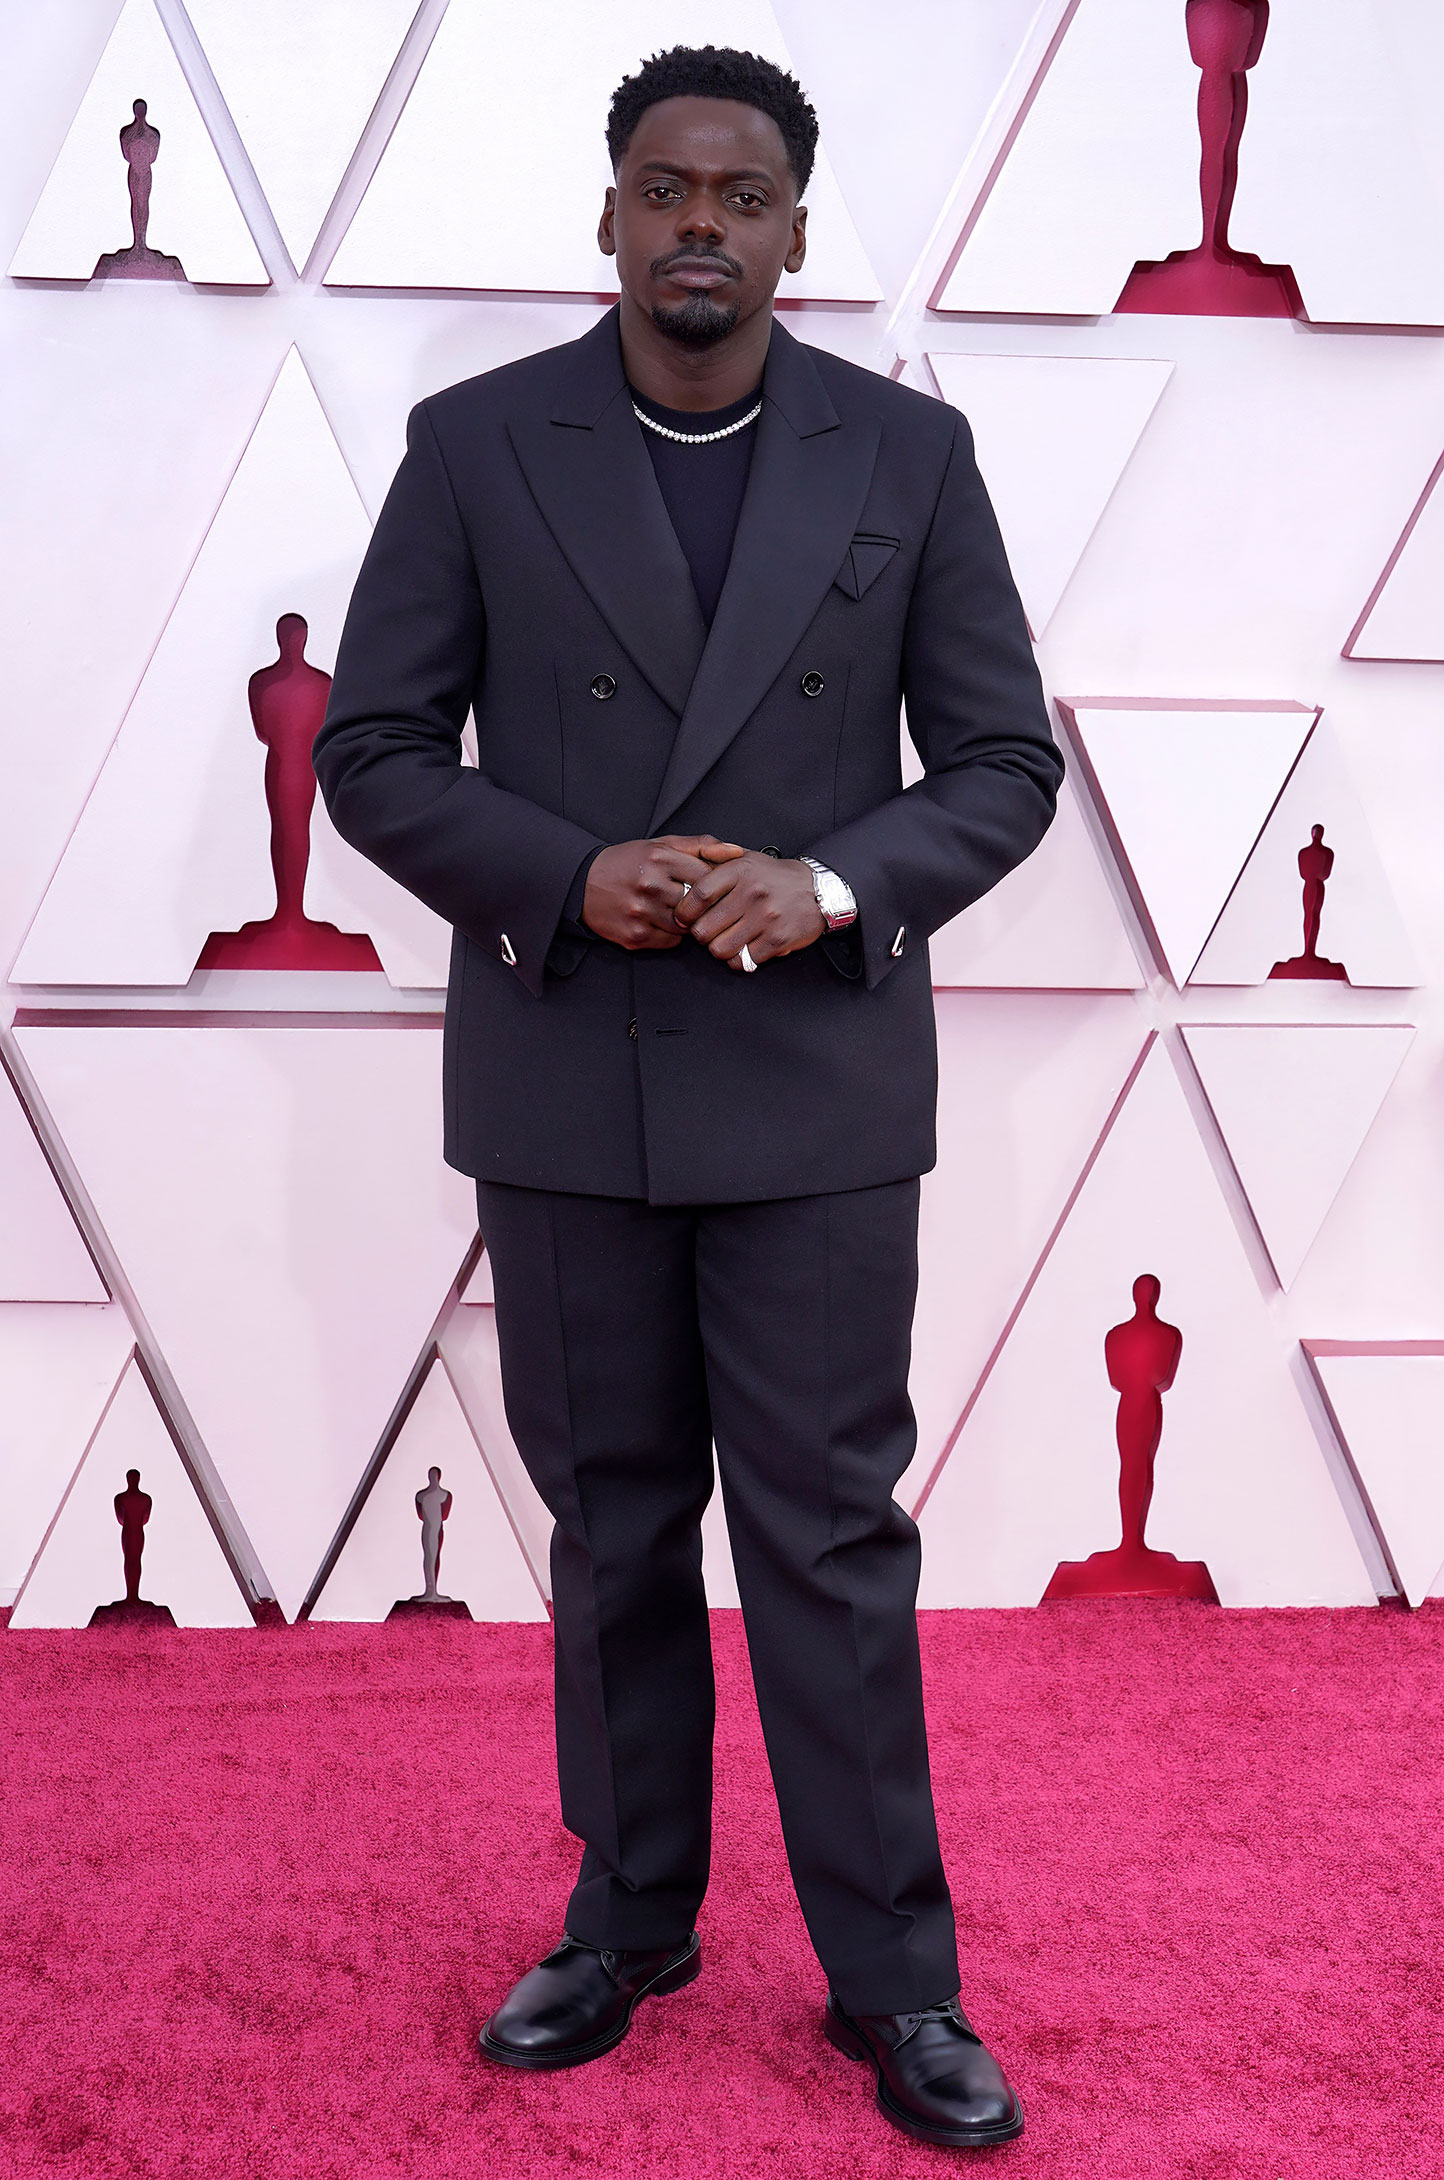 Oscars 2021: The Best-Dressed Men from the 93rd Annual Academy Awards